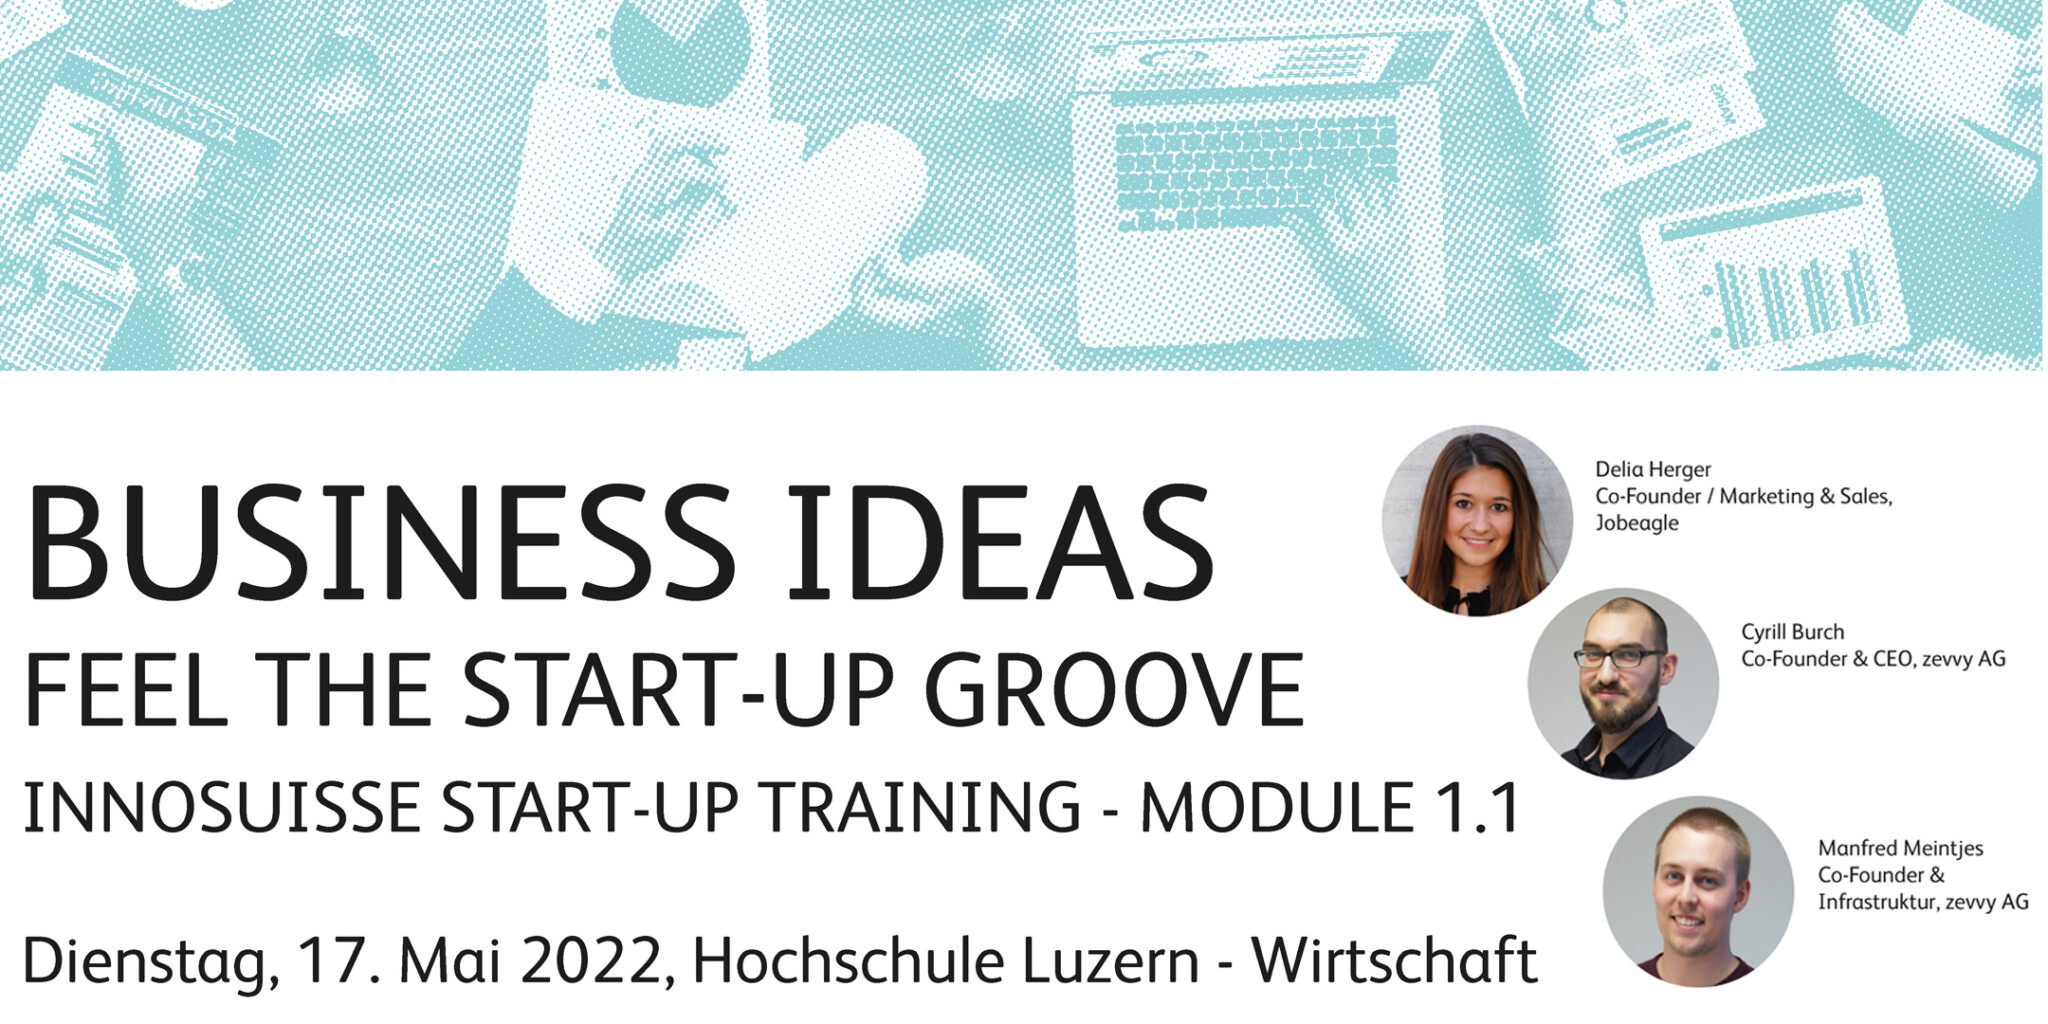 Business Ideas – Feel the Start-up groove!